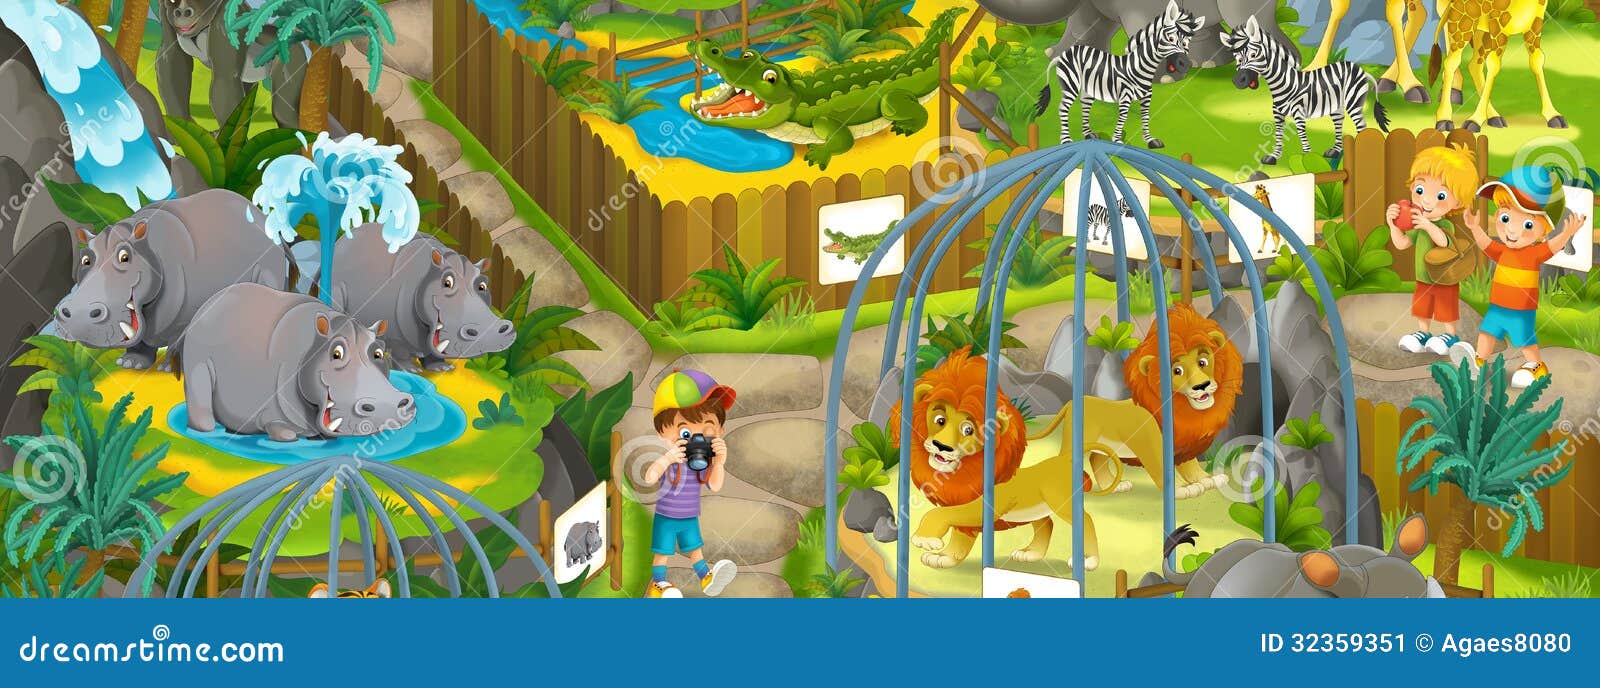 zoo map clipart - photo #37